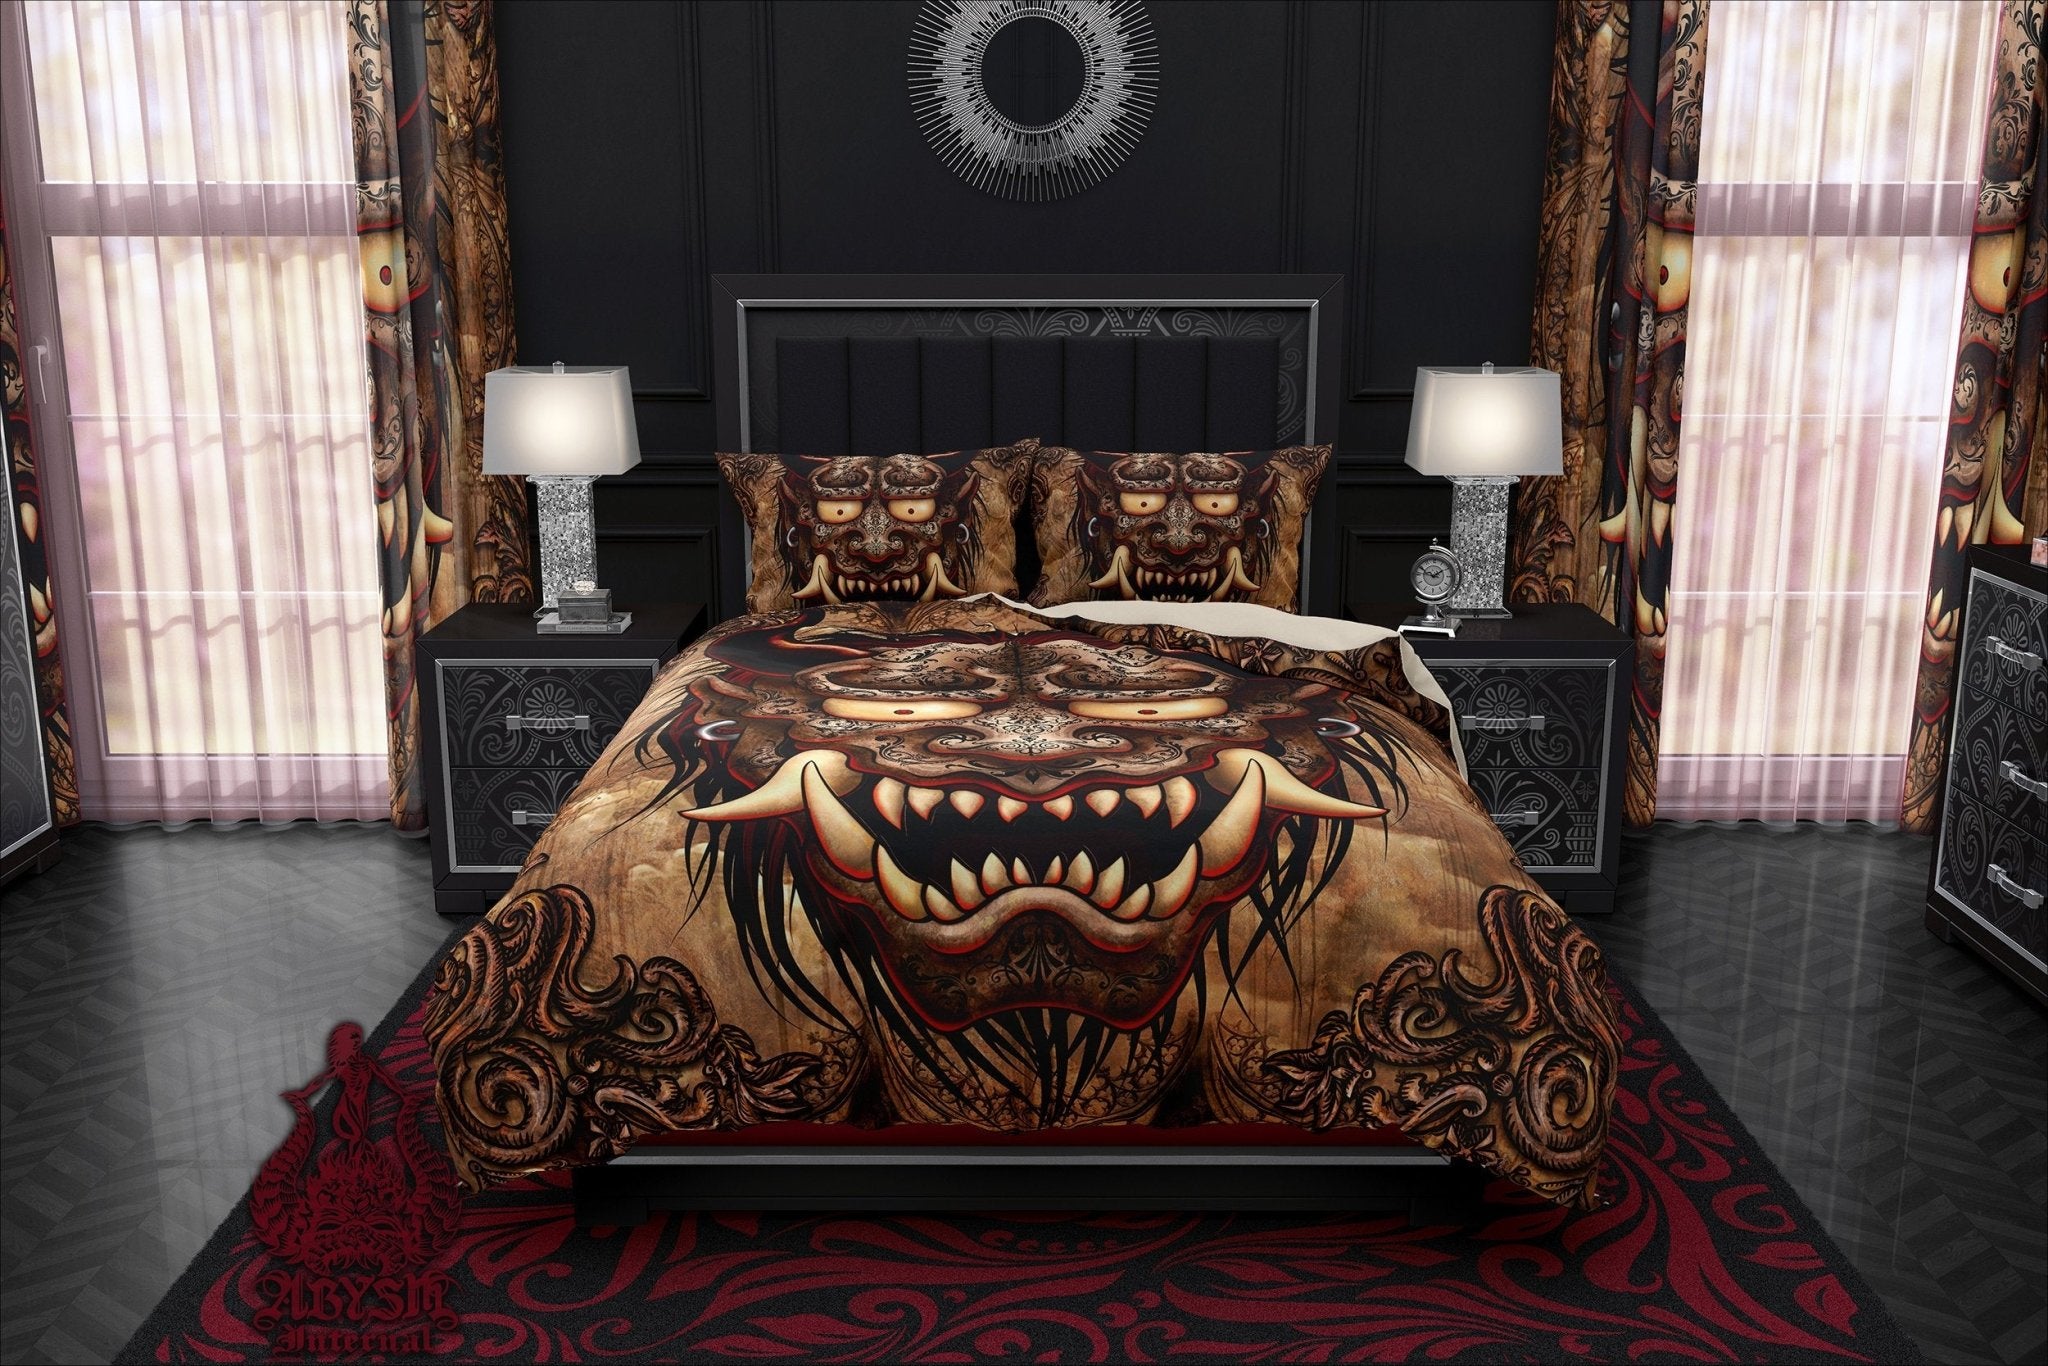 Oni Bedding Set, Comforter and Duvet, Goth Gargoyle Bed Cover and Bedroom Decor, Japanese Demon, King, Queen and Twin Size - Beige - Abysm Internal